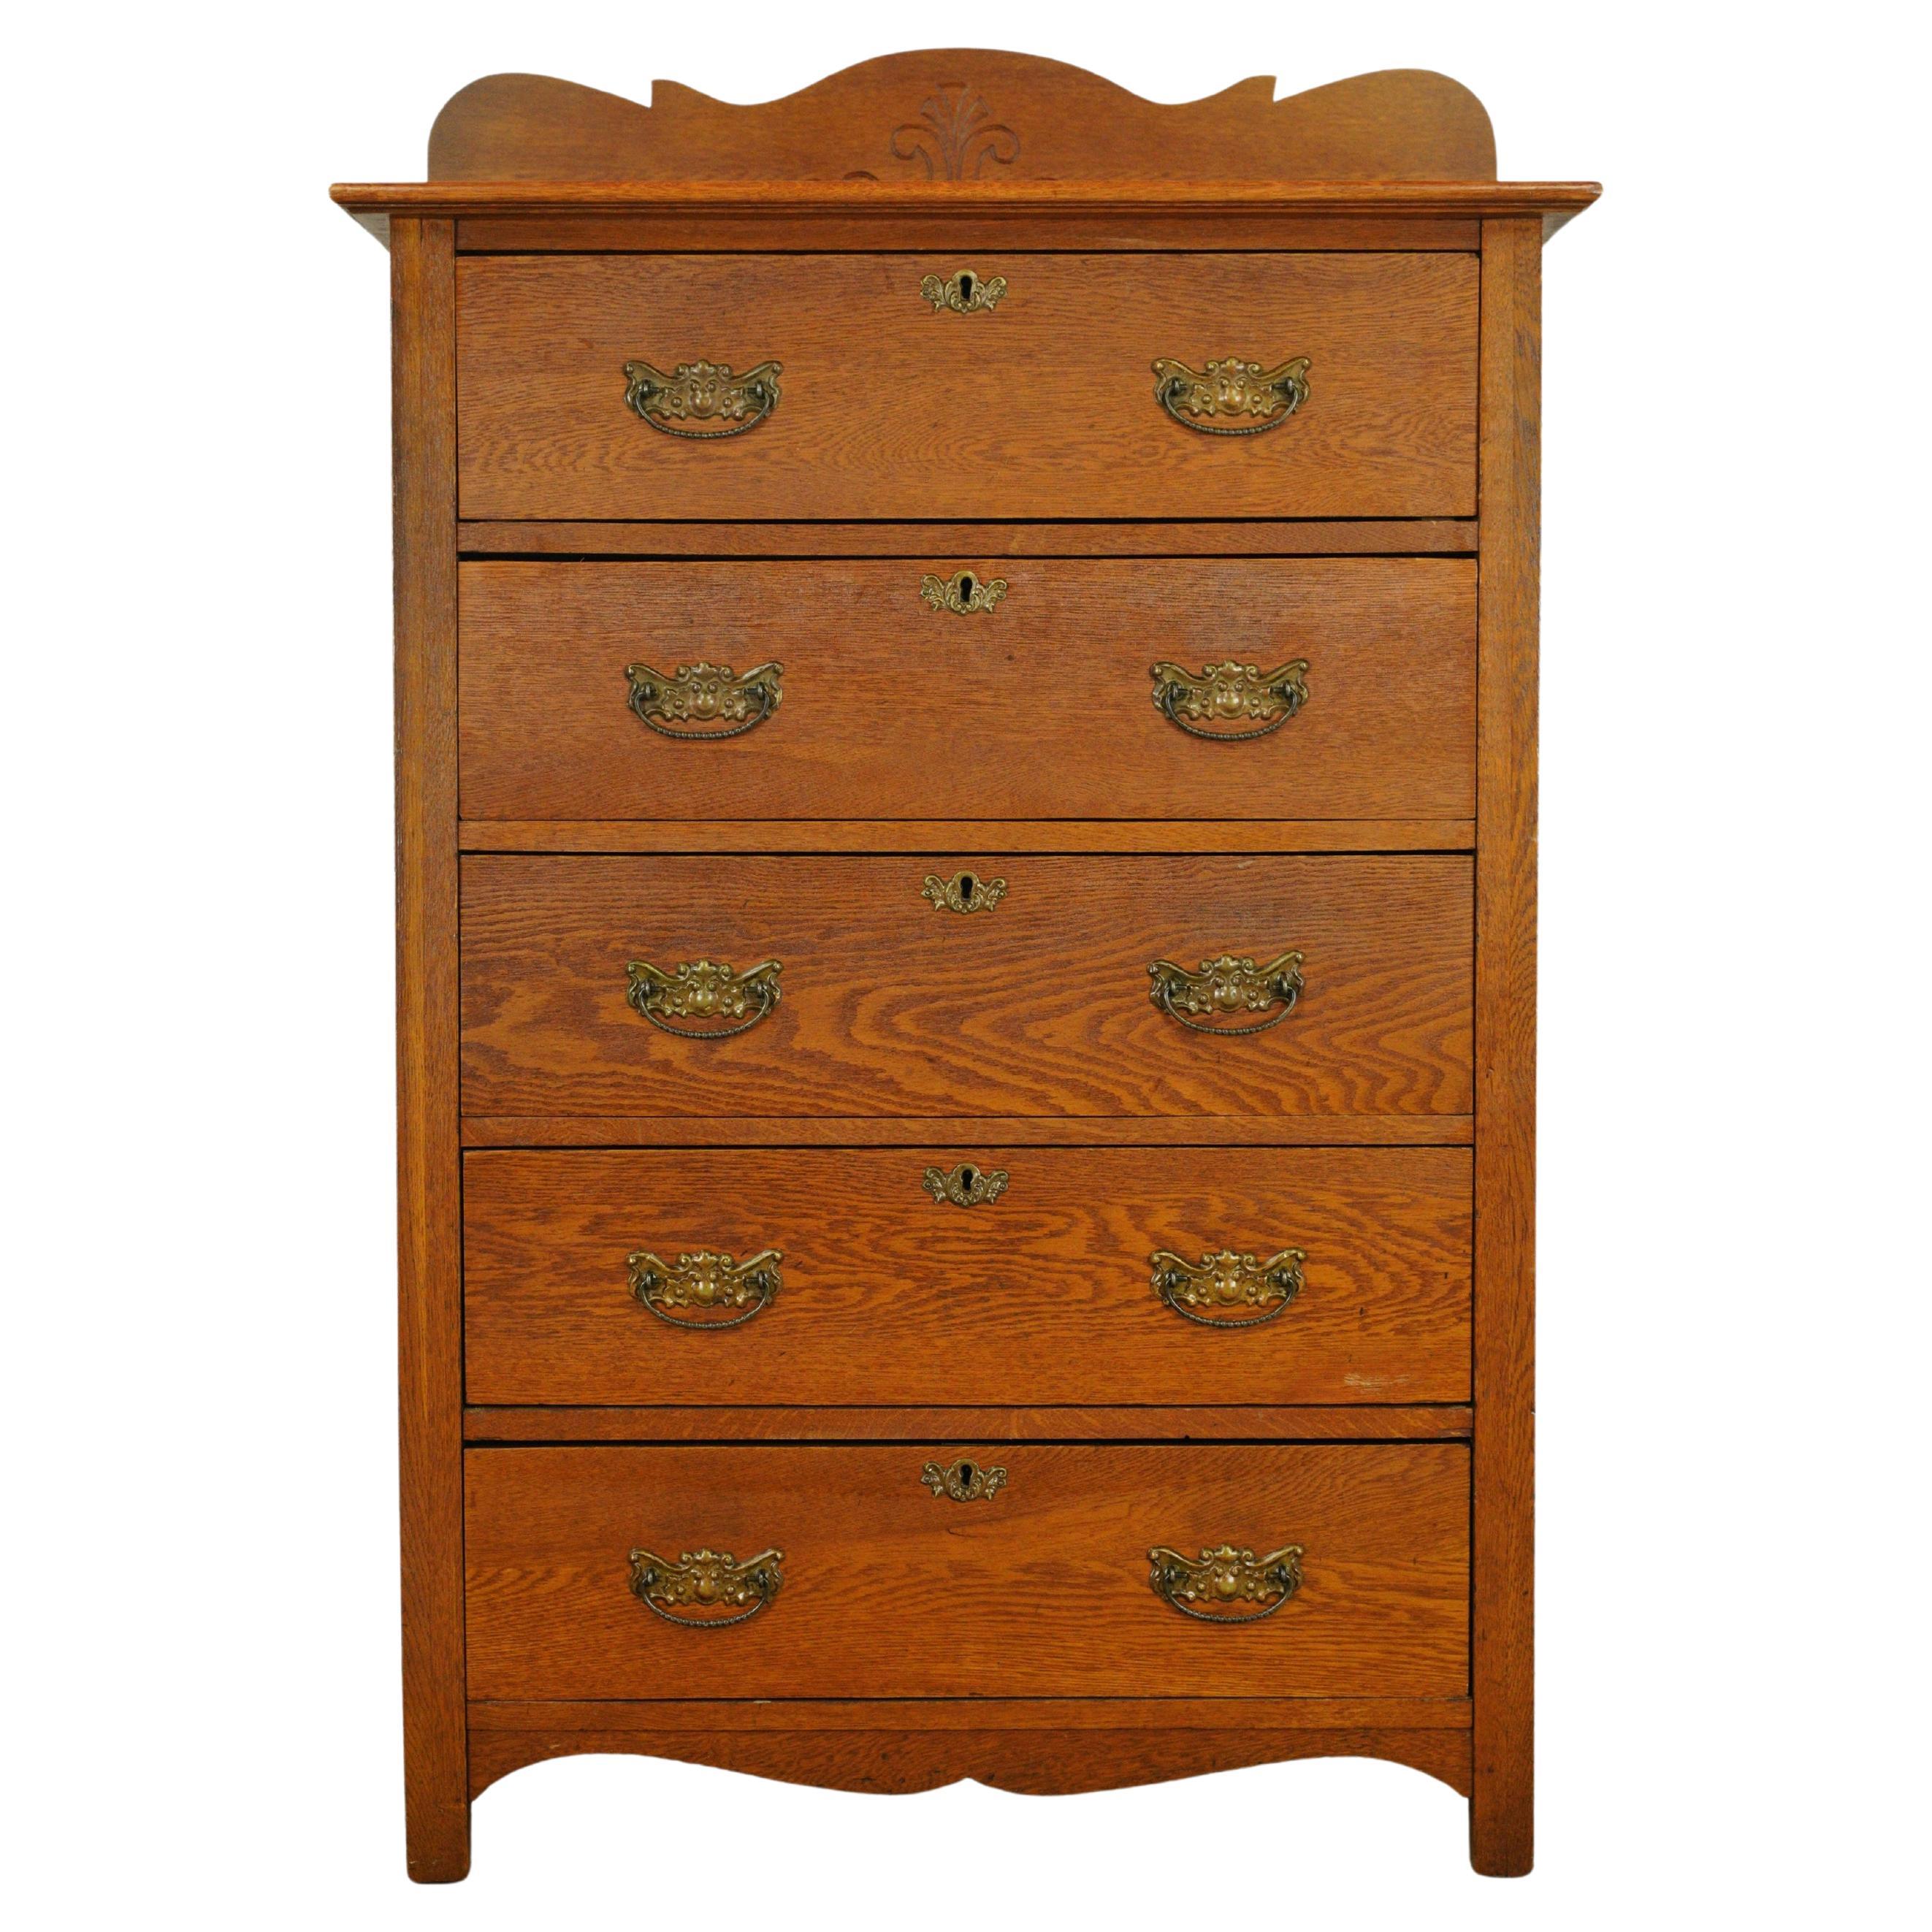 Early 20th C 5 Dovetailed Drawer Oak Highboy Dresser For Sale